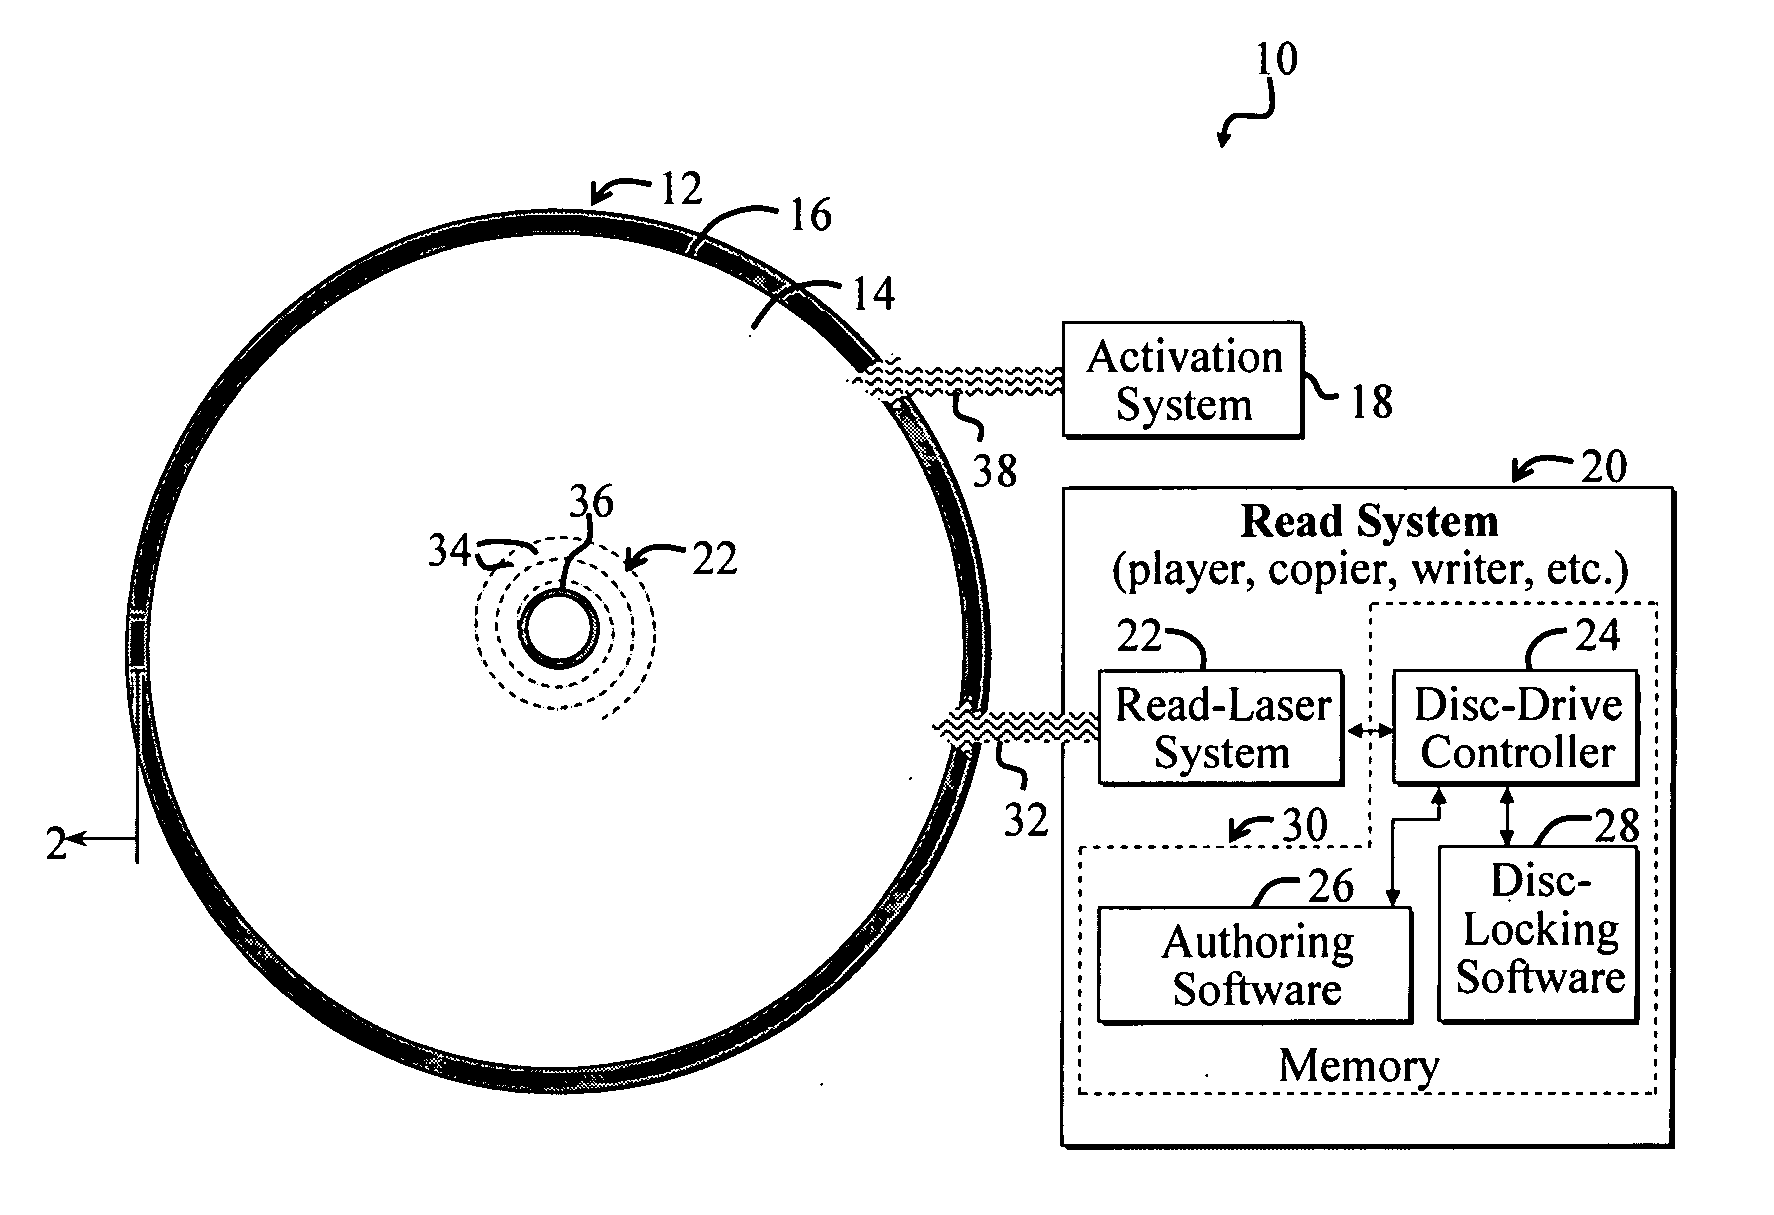 Selectively enabling playback of content on an optical medium